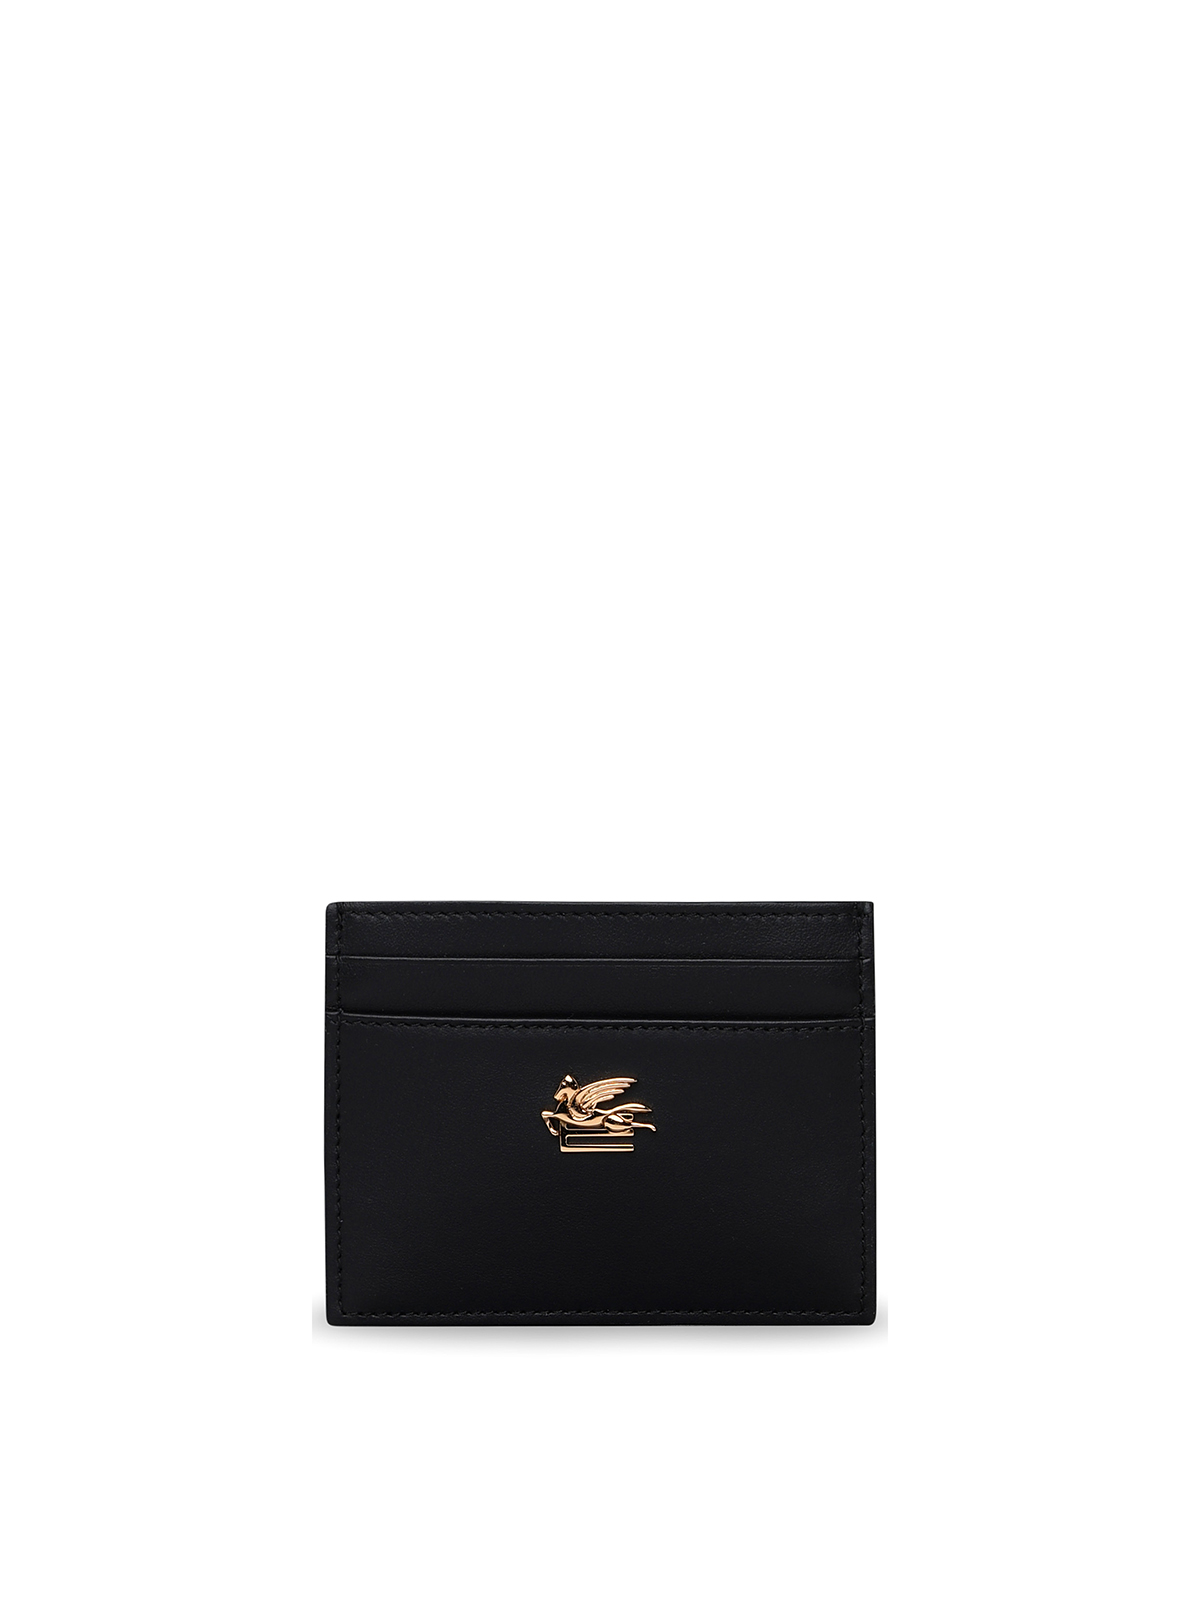 Etro Card Holder In Black Leather